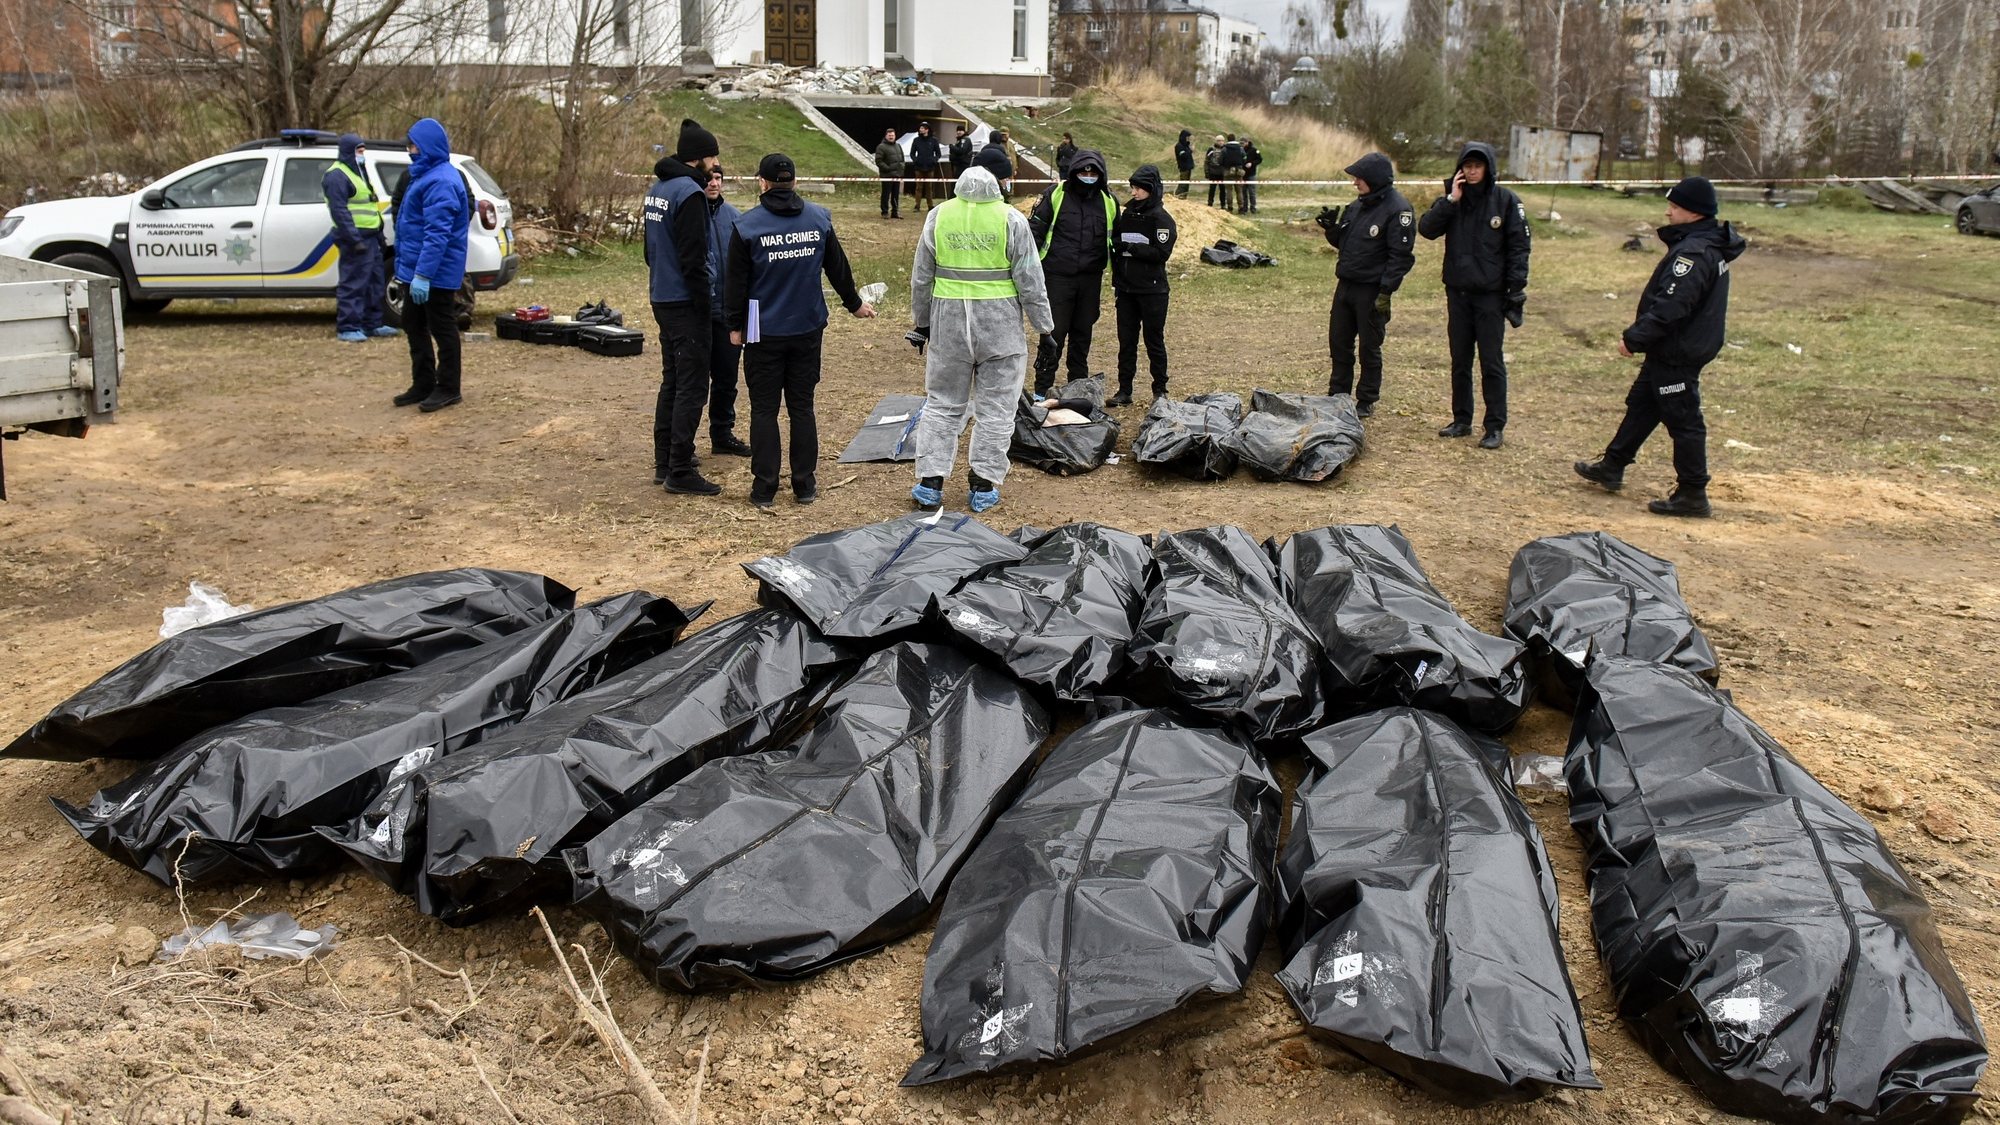 epa09887828 Bodies are exhumed and removed from the mass grave near the St. Andrew and All Saints Church in Bucha city of Kyiv (Kiev) area, Ukraine, 13 April 2022. Forensic investigators began exhuming a mass grave in Bucha containing more than 410 bodies of civilians, according to Ukrainian officials. The UN Human Rights Council has decided to launch an investigation into the violations committed after Russia&#039;s full-scale invasion of Ukraine, the Ukrainian Parliament reported. Russian troops entered Ukraine on 24 February resulting in fighting and destruction in the country and triggering a series of severe economic sanctions on Russia by Western countries.  EPA/OLEG PETRASYUK